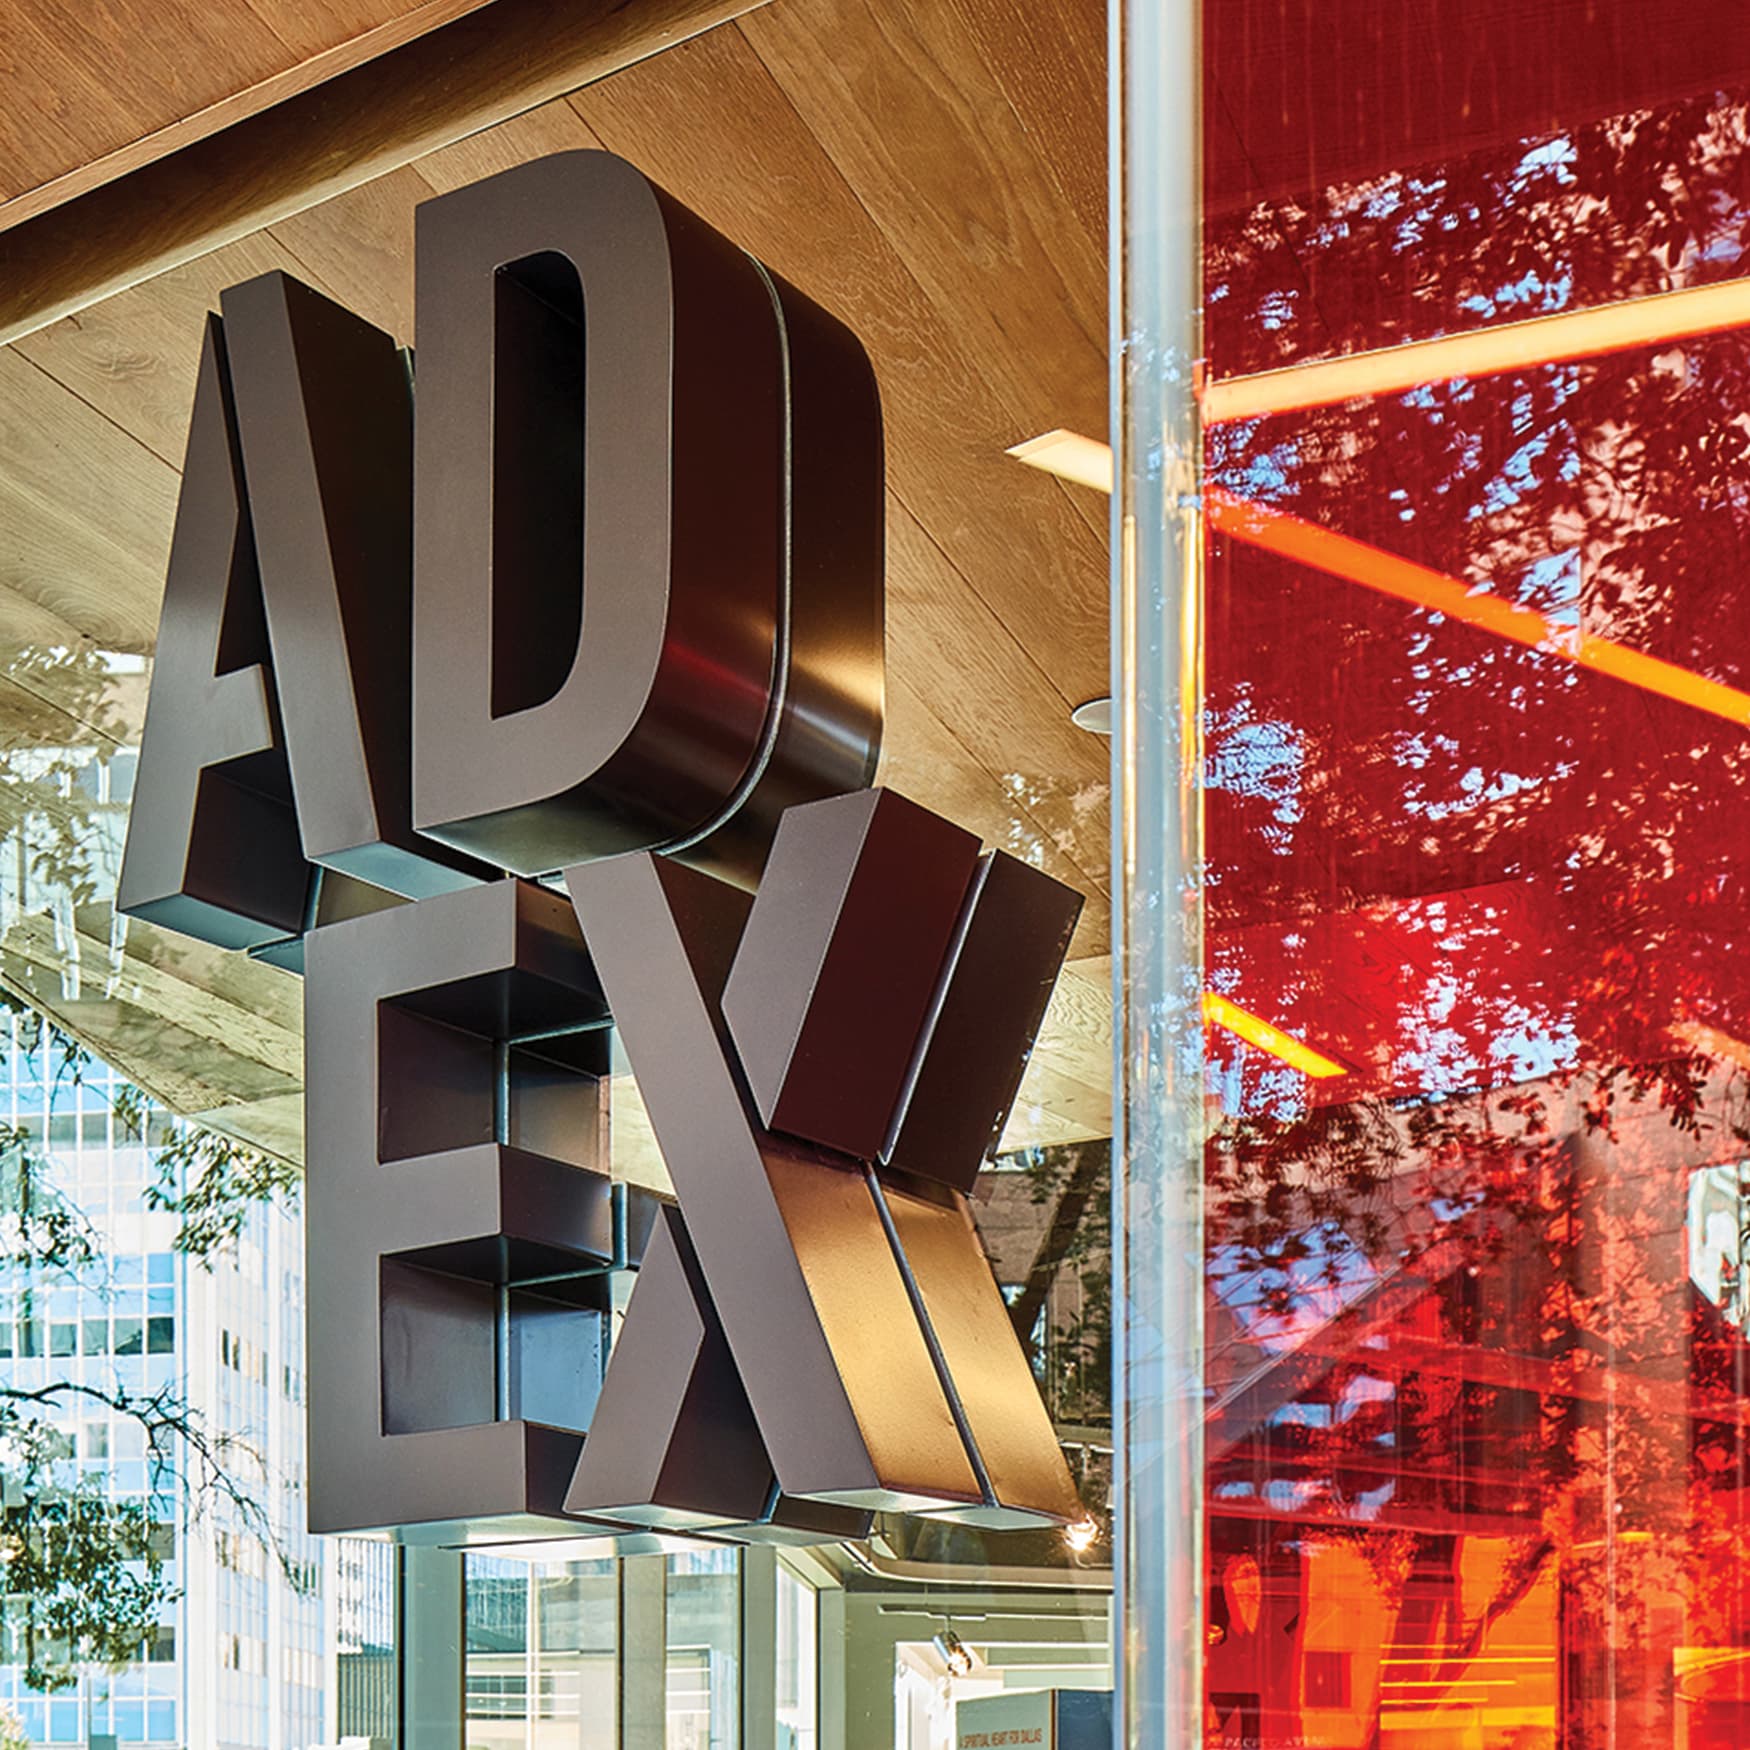 AD EX dimensional signage identity mounted to glass facade of architecture